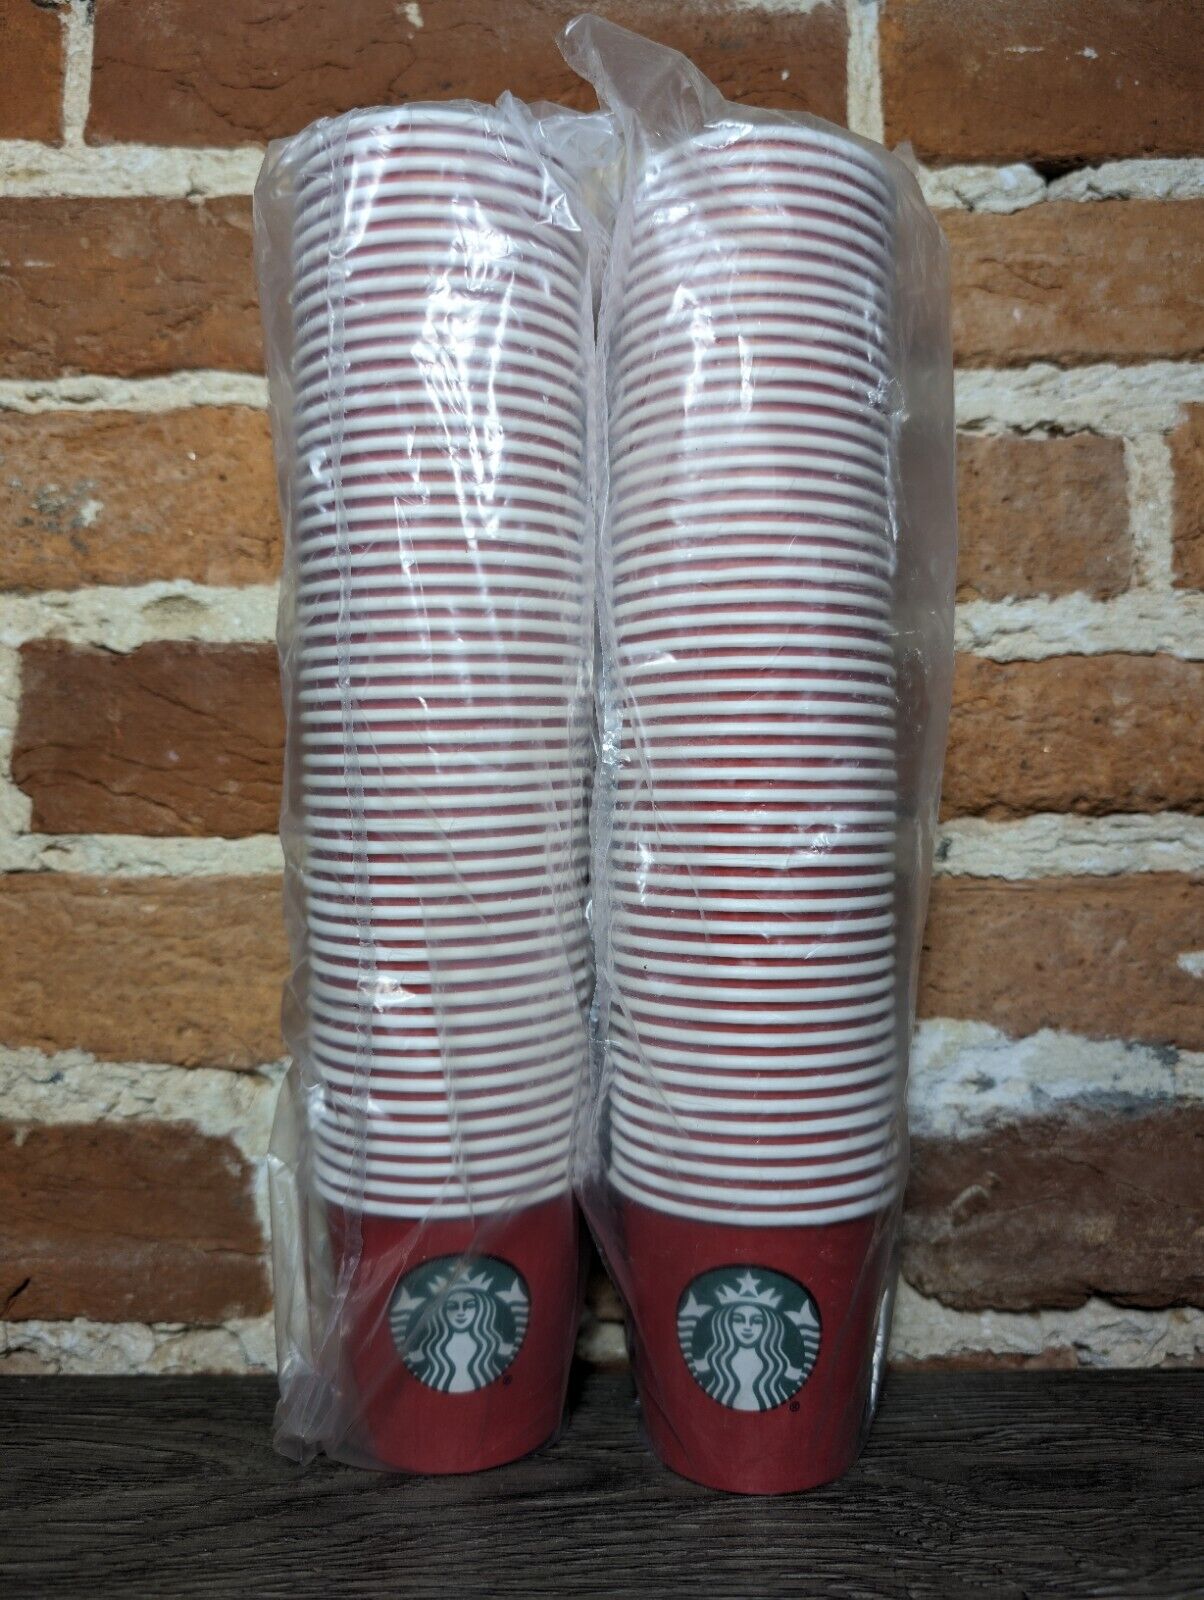 TWO SLEEVES Starbucks HOLIDAY Coffee Espresso 4oz Sample Size 100 Cups Sealed